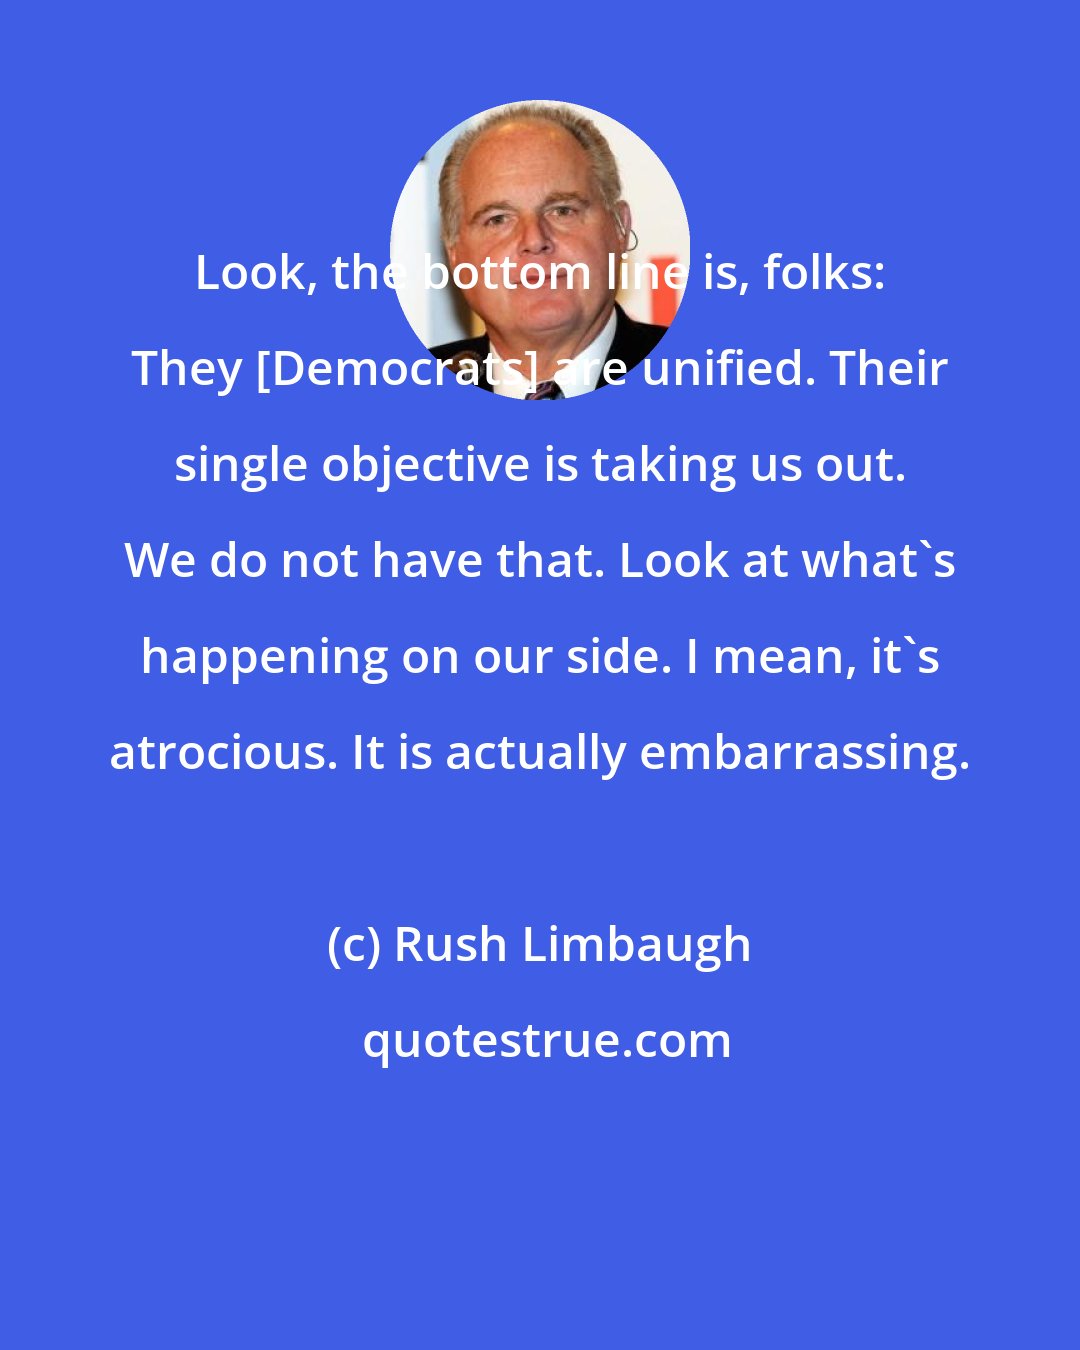 Rush Limbaugh: Look, the bottom line is, folks: They [Democrats] are unified. Their single objective is taking us out. We do not have that. Look at what's happening on our side. I mean, it's atrocious. It is actually embarrassing.